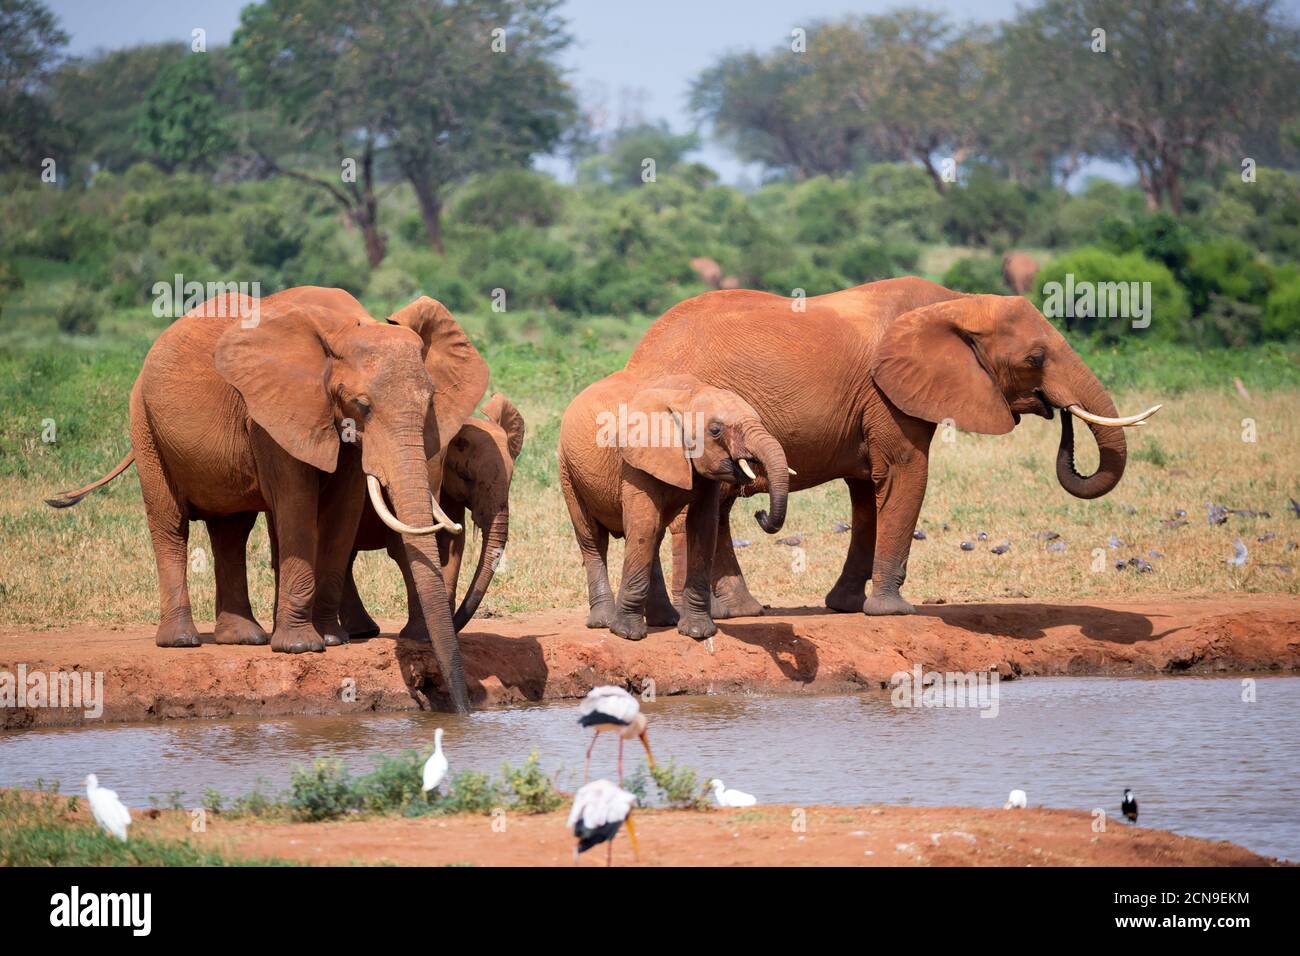 Family of elephants drinking water from the waterhole Stock Photo